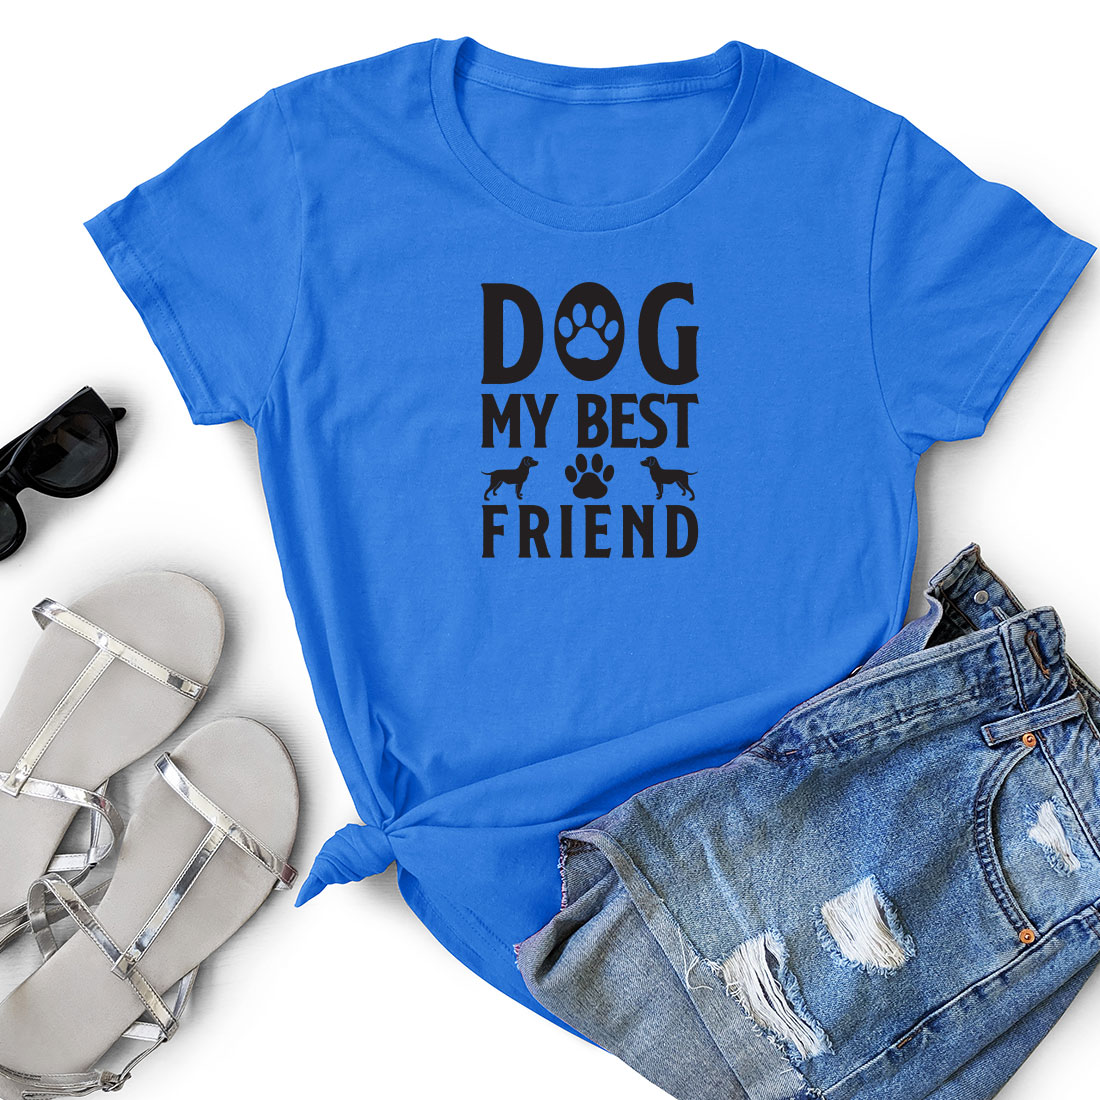 T - shirt that says dog my best friend next to a pair of shorts.